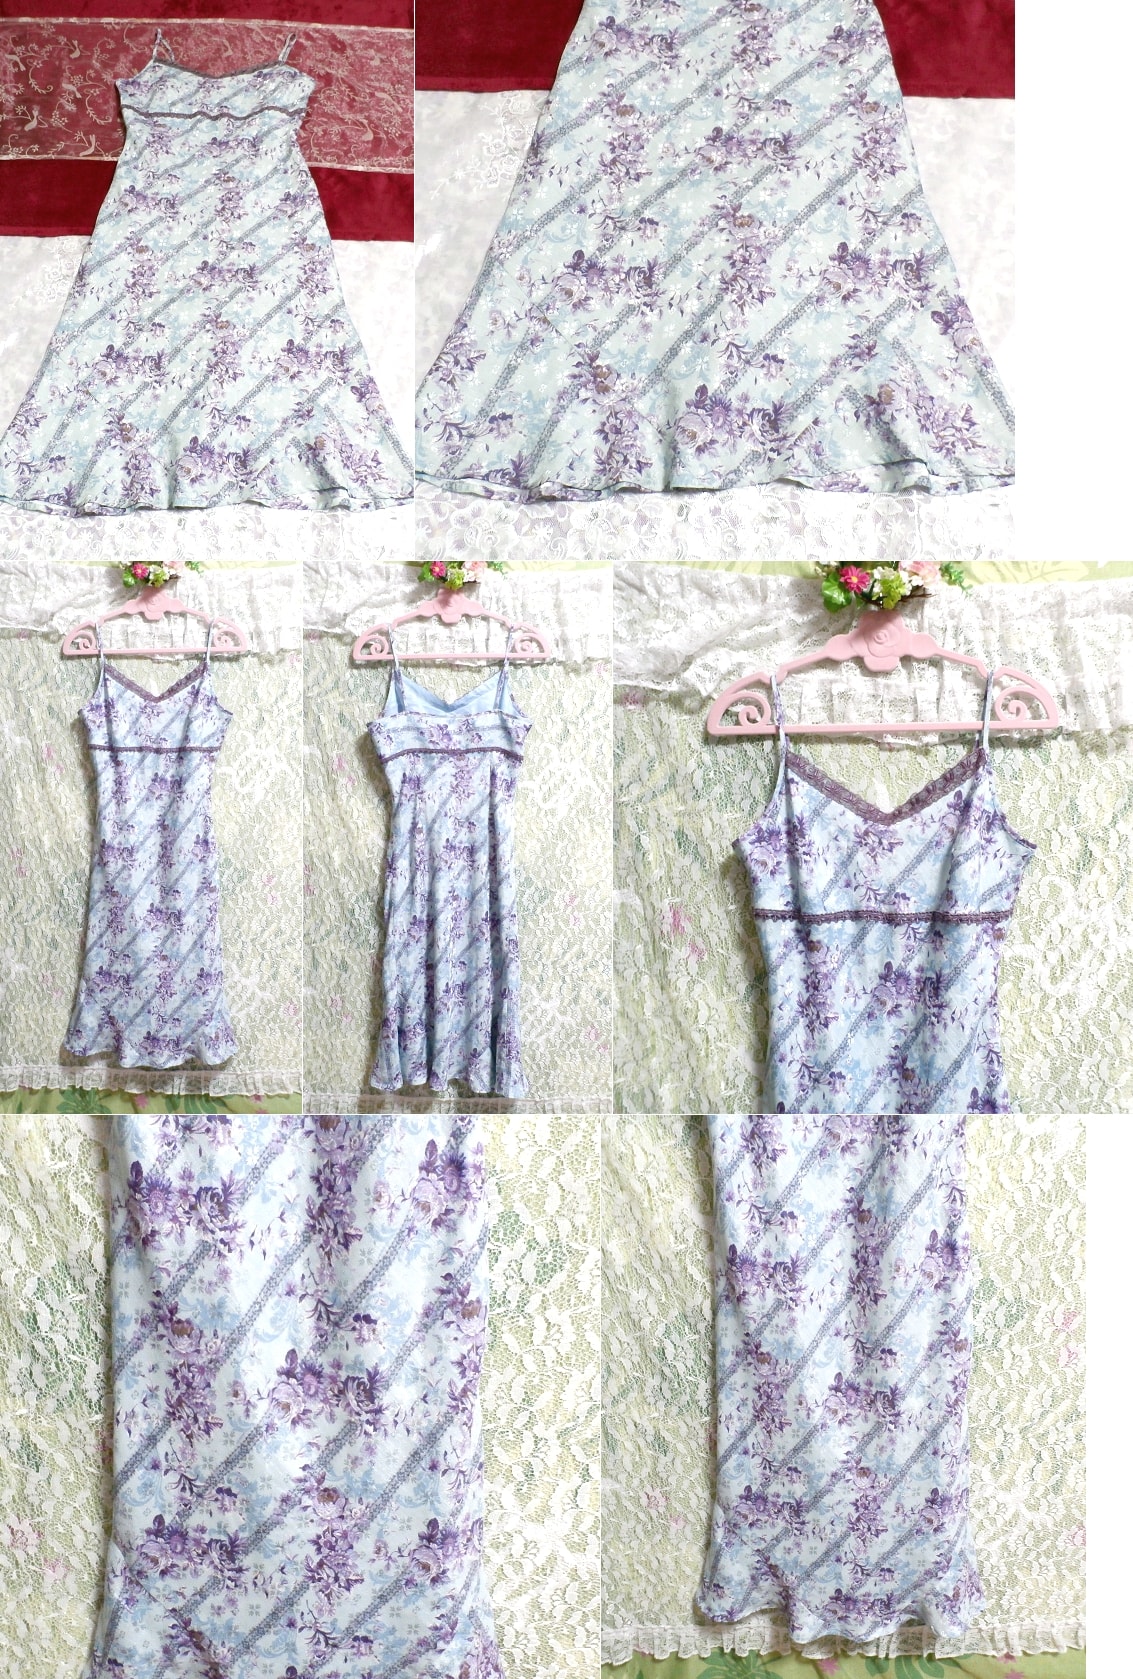 Light blue and purple floral pattern negligee nightgown camisole dress skirt, knee length skirt, m size